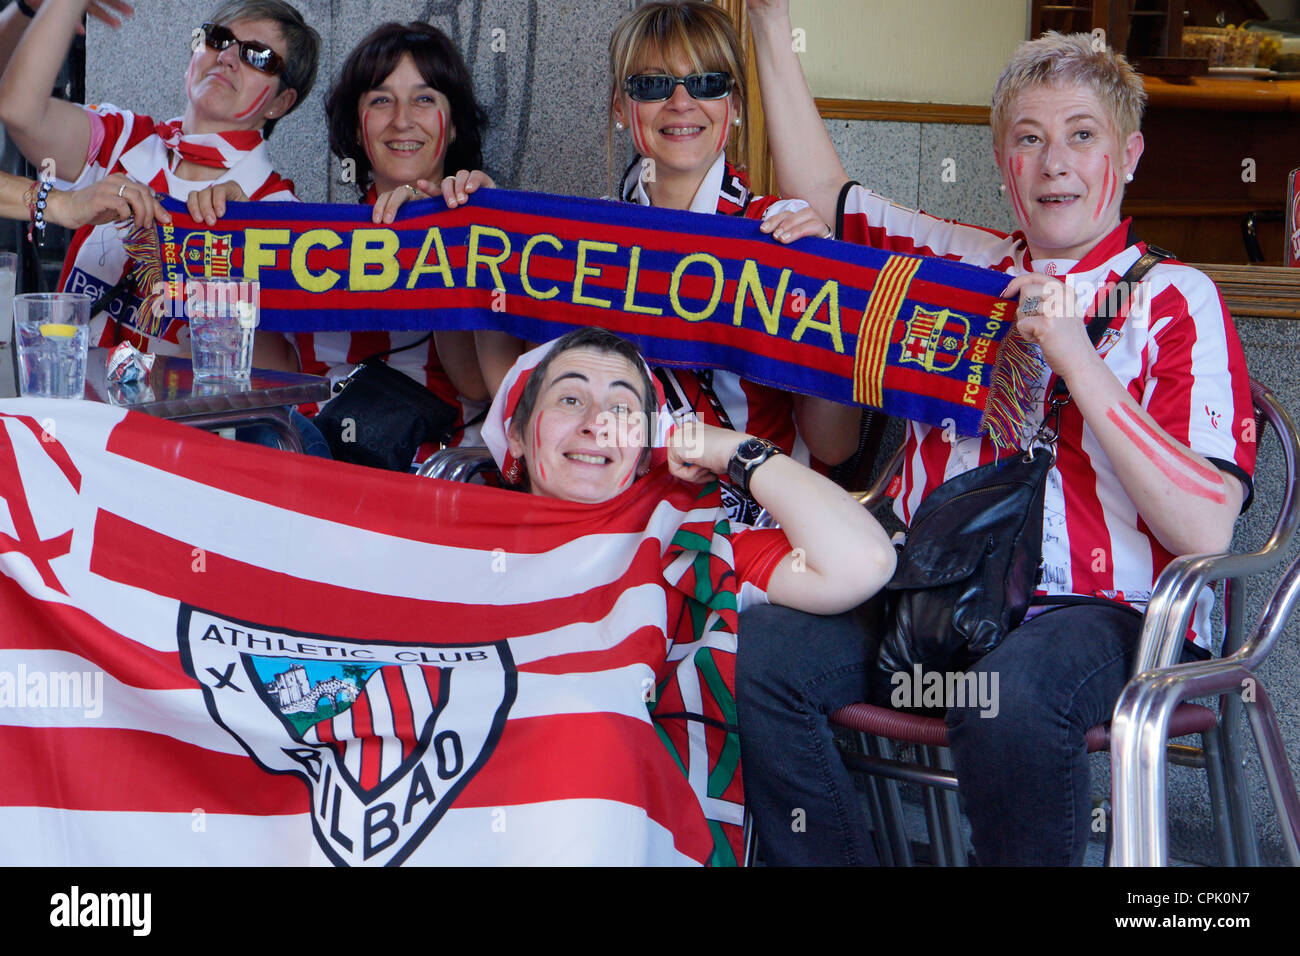 The final of the Copa del Rey has Madrid buzzing with Athletic Bilbao and FC Barcelona supporters. Stock Photo